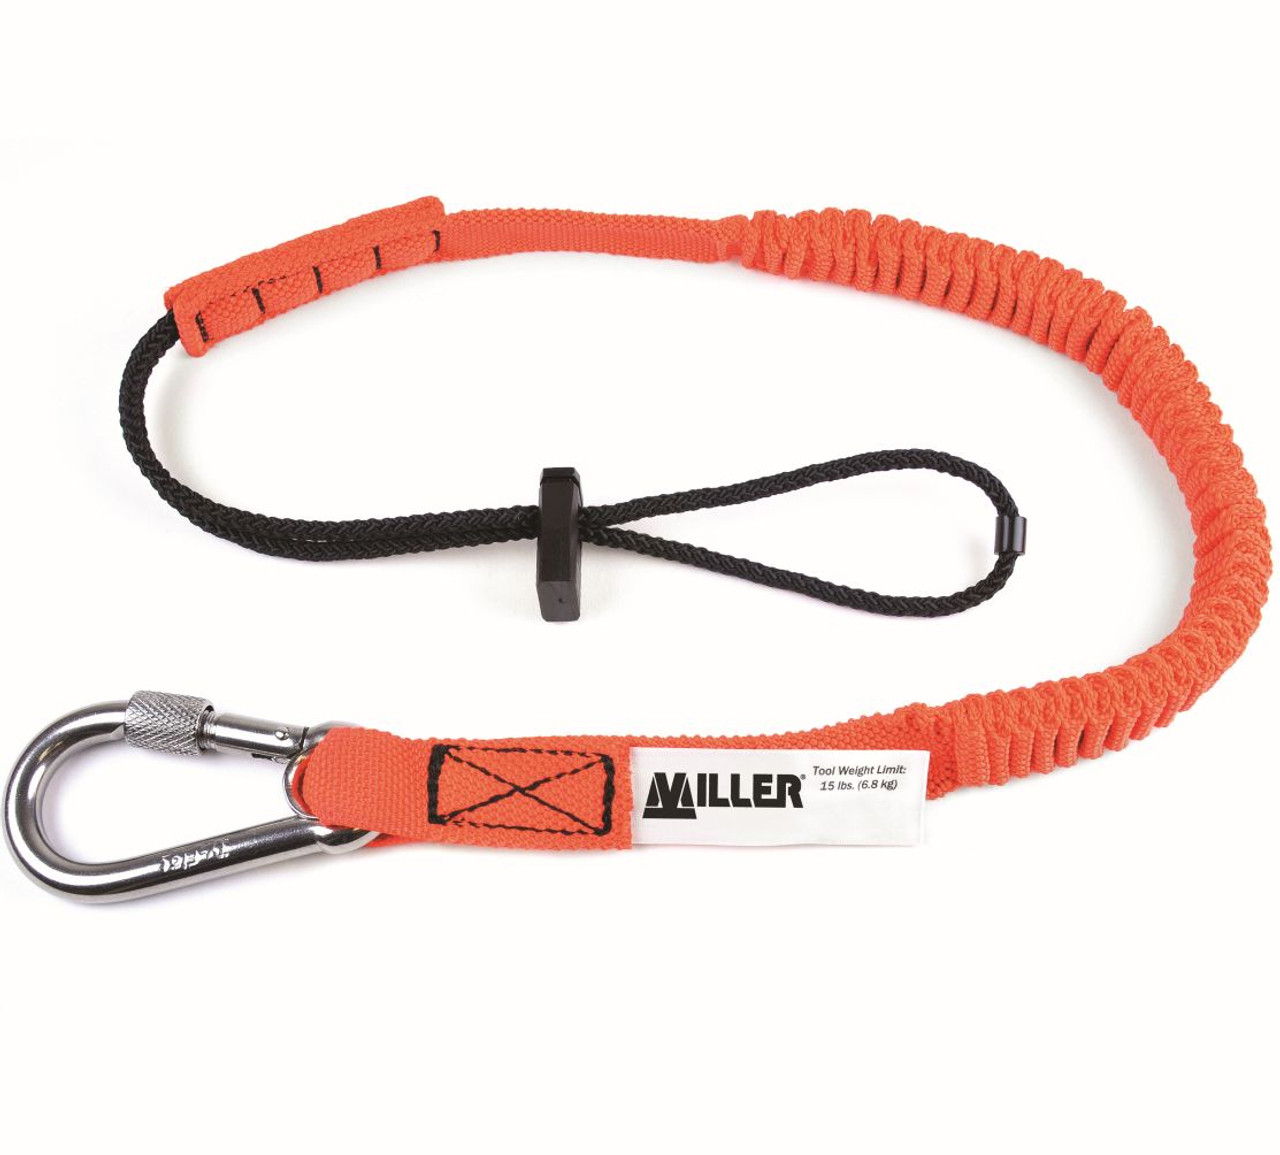  Angoily Construction Accessories Miss Rope Tool Lanyard for  Hammer Lanyard Safety Harness Lanyard Tool Lanyard Retractable Tool  Aluminum Alloy Elastic Rope seat Belt abs Carabiner : Tools & Home  Improvement